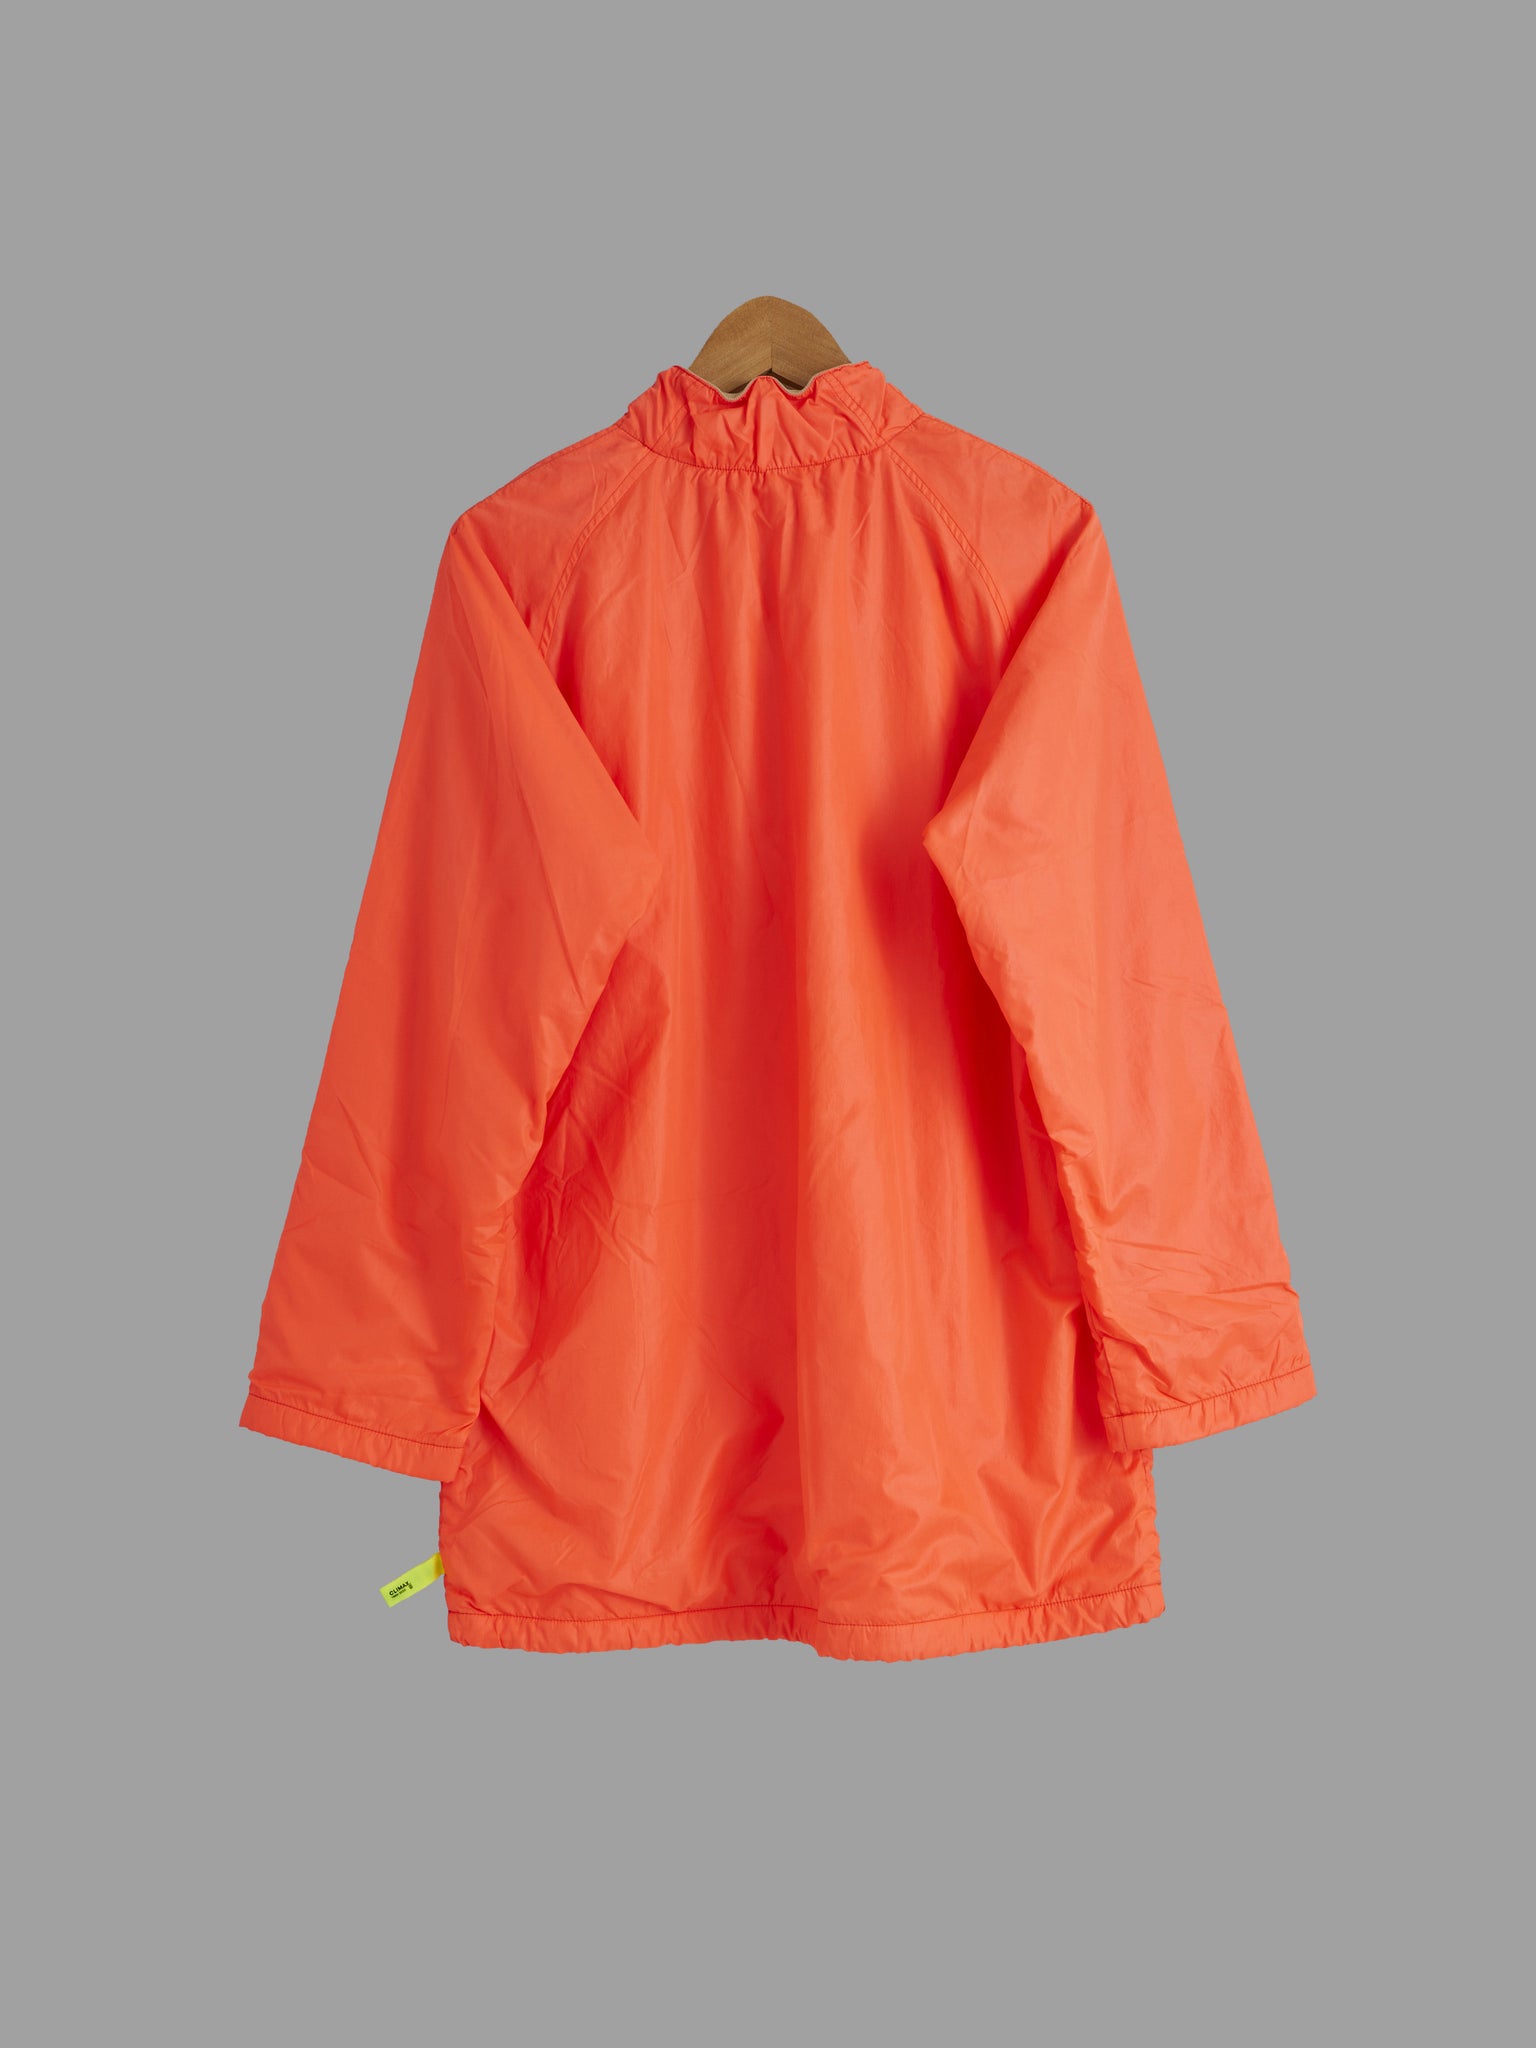 Zucca AW1999-2000 'the year of climax' fluorescent orange pullover - size M S